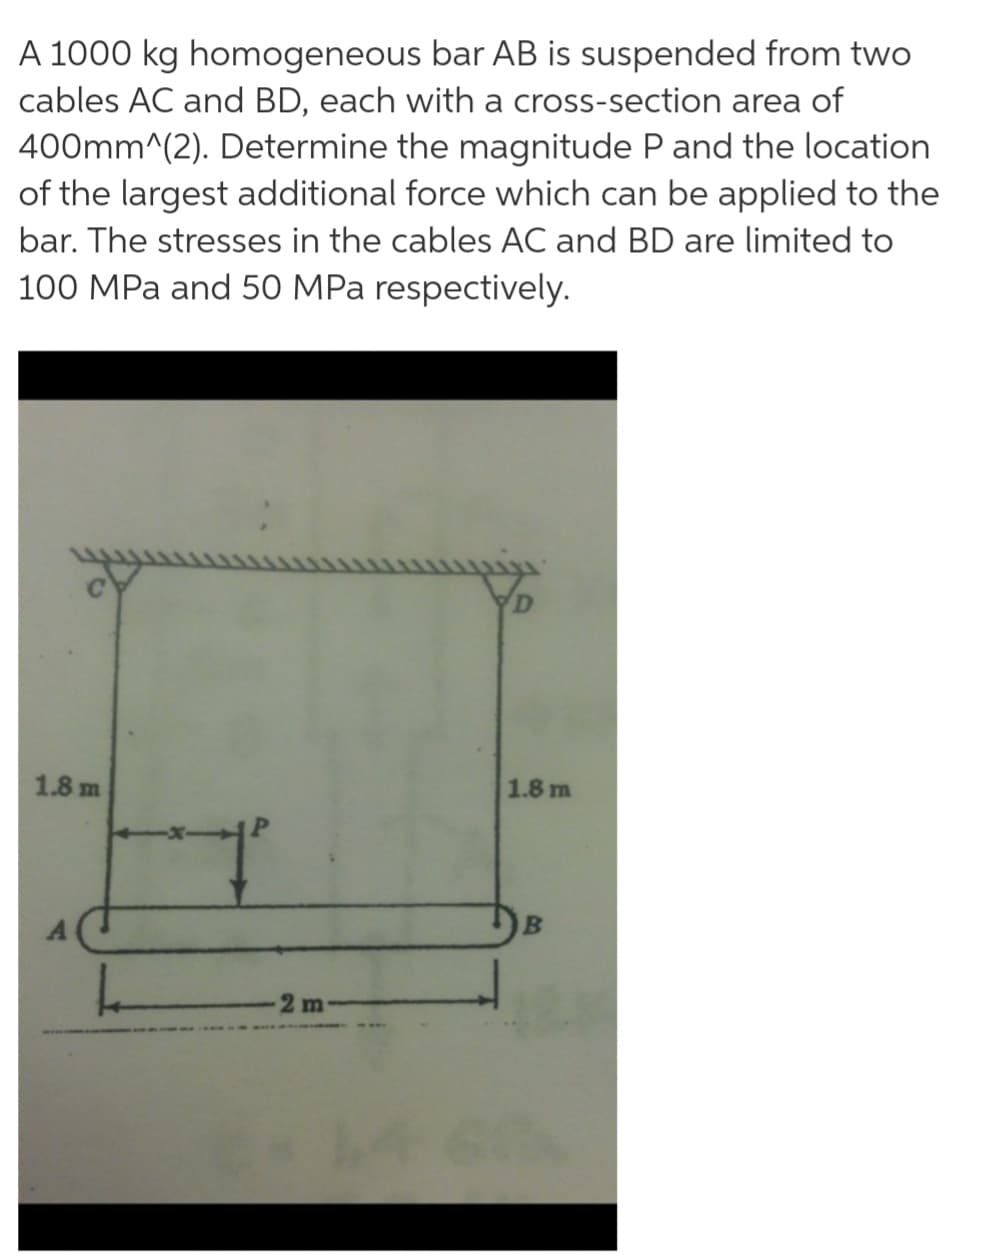 A 1000 kg homogeneous bar AB is suspended from two
cables AC and BD, each with a cross-section area of
400mm^(2). Determine the magnitude P and the location
of the largest additional force which can be applied to the
bar. The stresses in the cables AC and BD are limited to
100 MPa and 50 MPa respectively.
1.8 m
1.8 m
2 m
